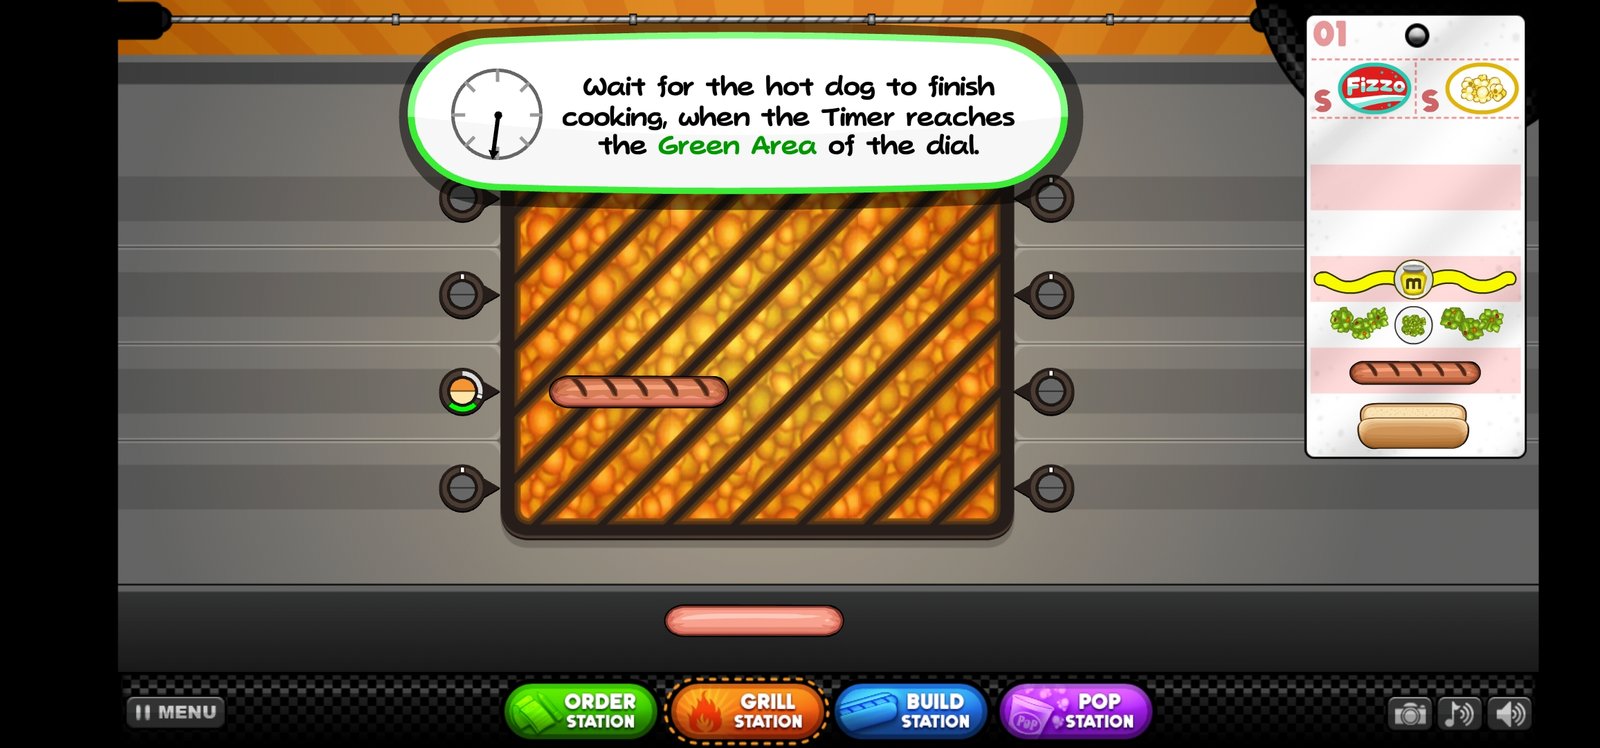 Papa's Hot Doggeria To Go APK (Android Game) - Free Download